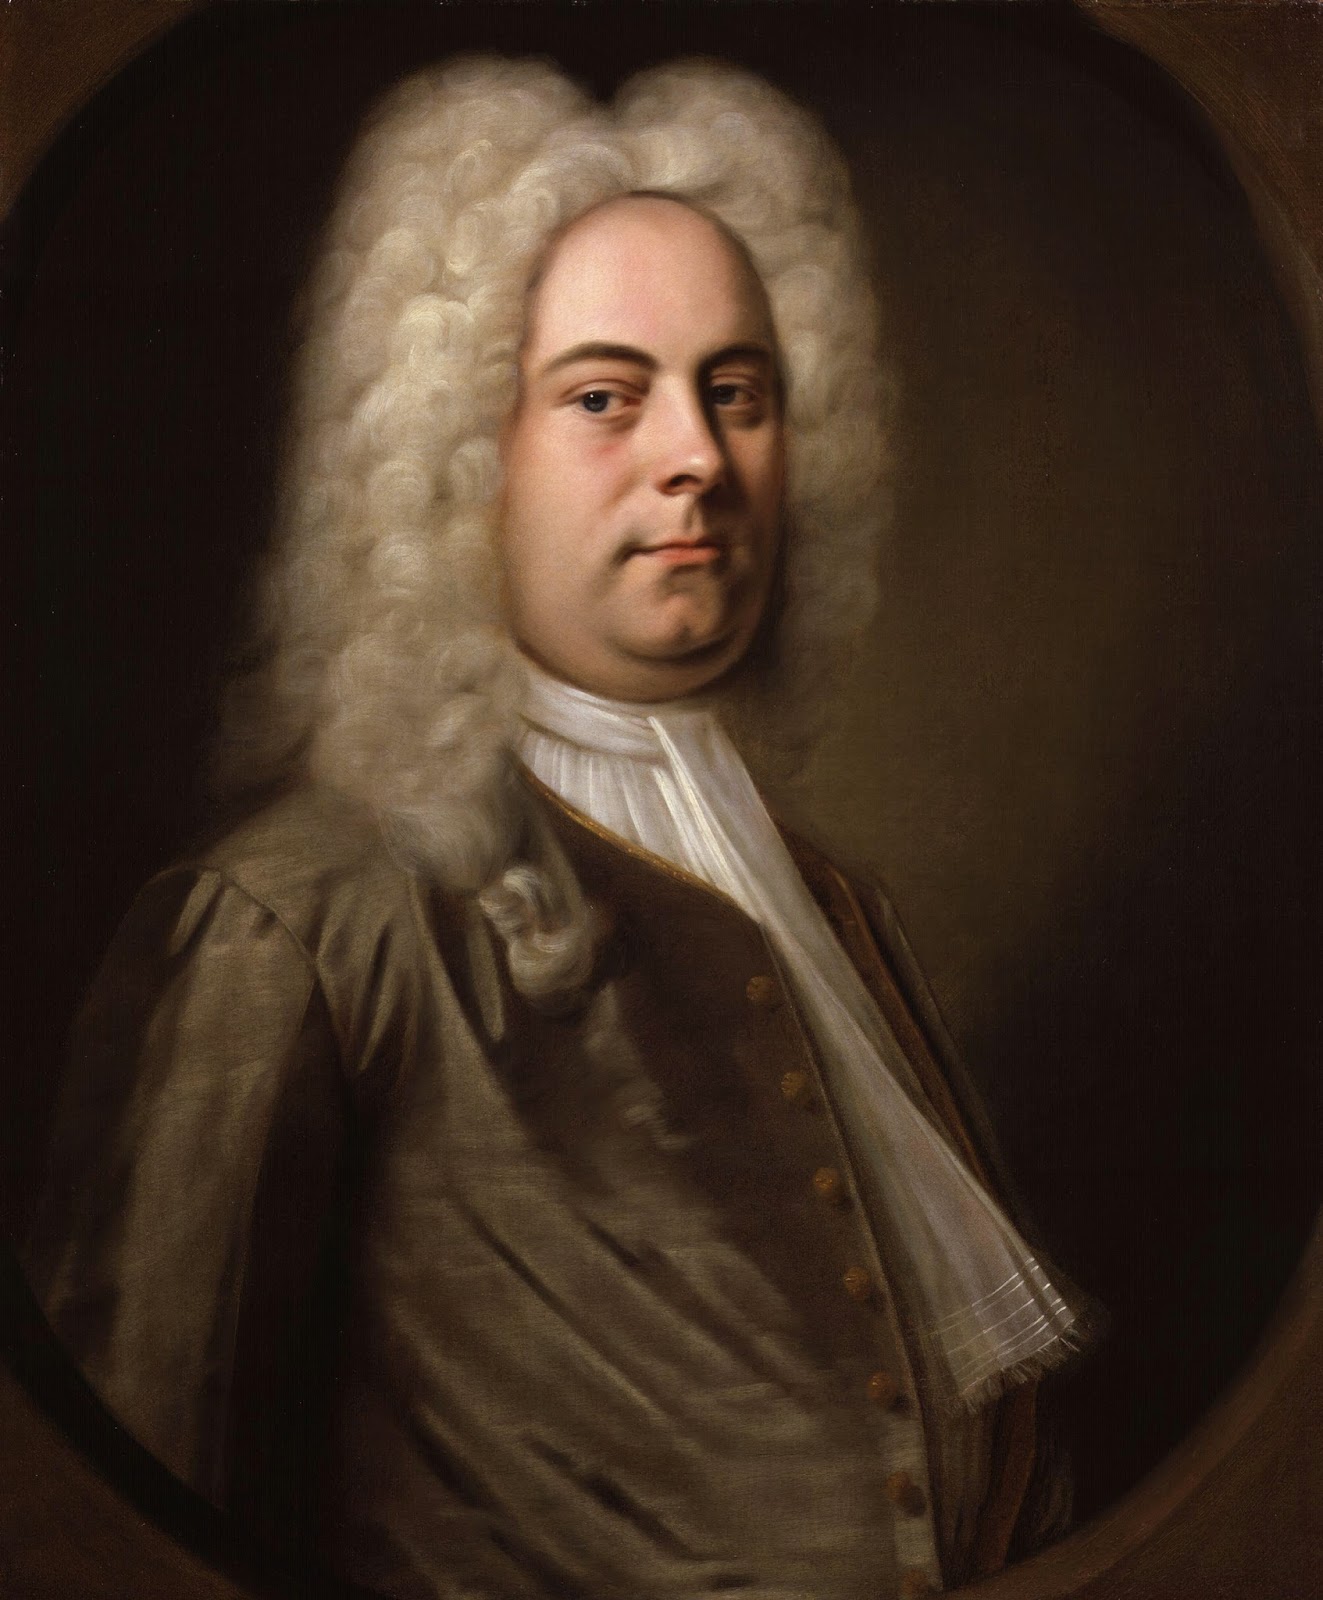 The 15 Greatest Classical Composers Of All Time - George Frideric Handel (1685-1759)